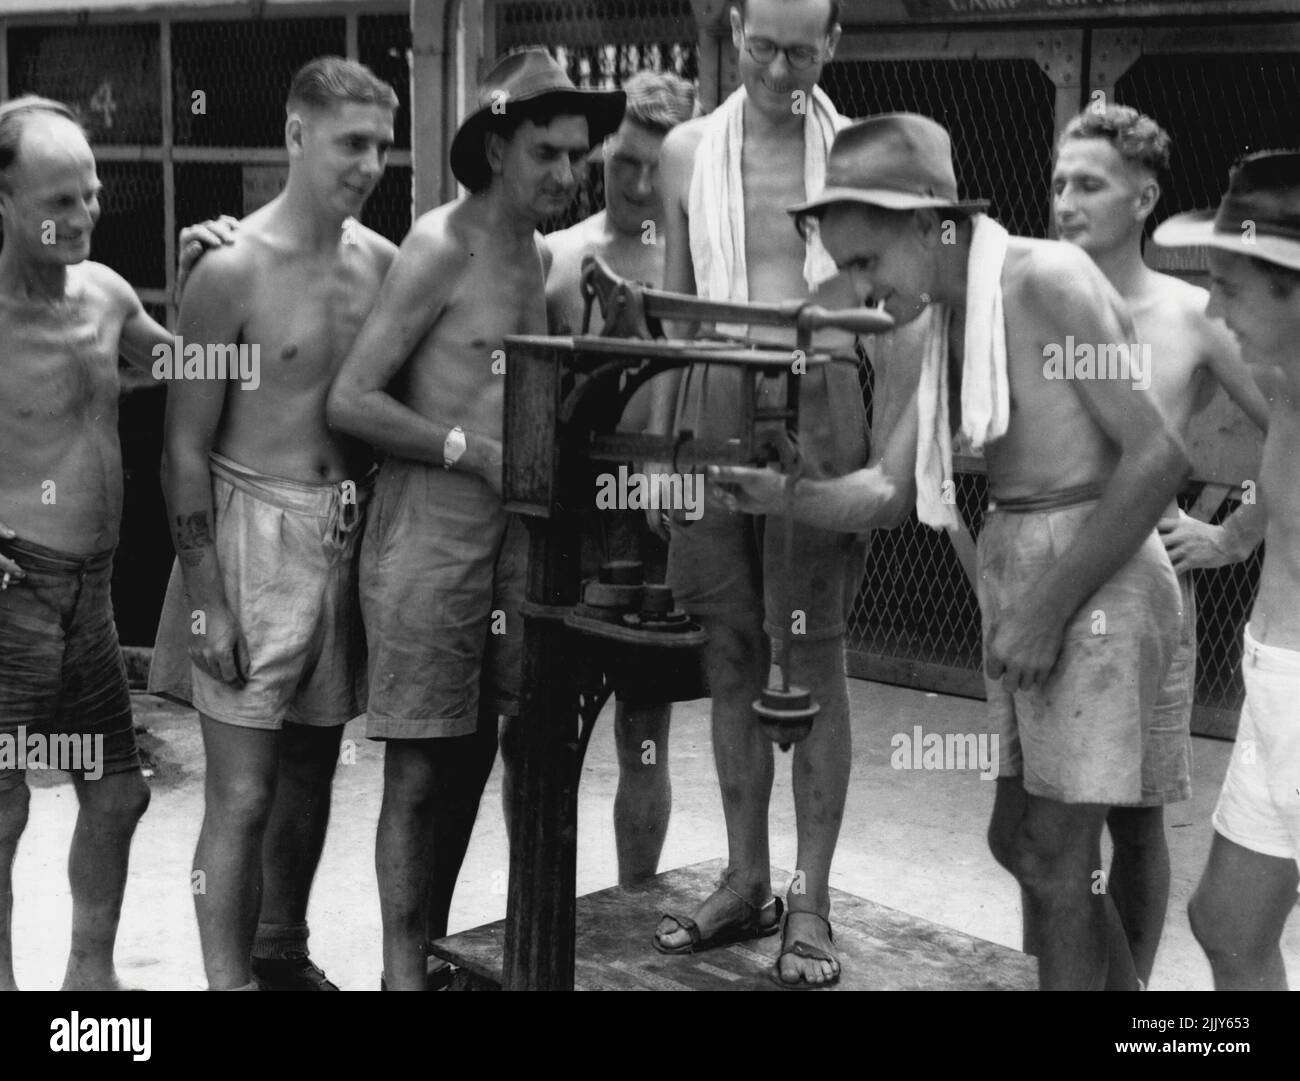 Members of 8 Division, ex prisoners of war of the Japanese, checking their weight gains on a set of scales in the jail courtyard. September 19, 1945. (Photo by Australian War Memorial Canberra). Stock Photo